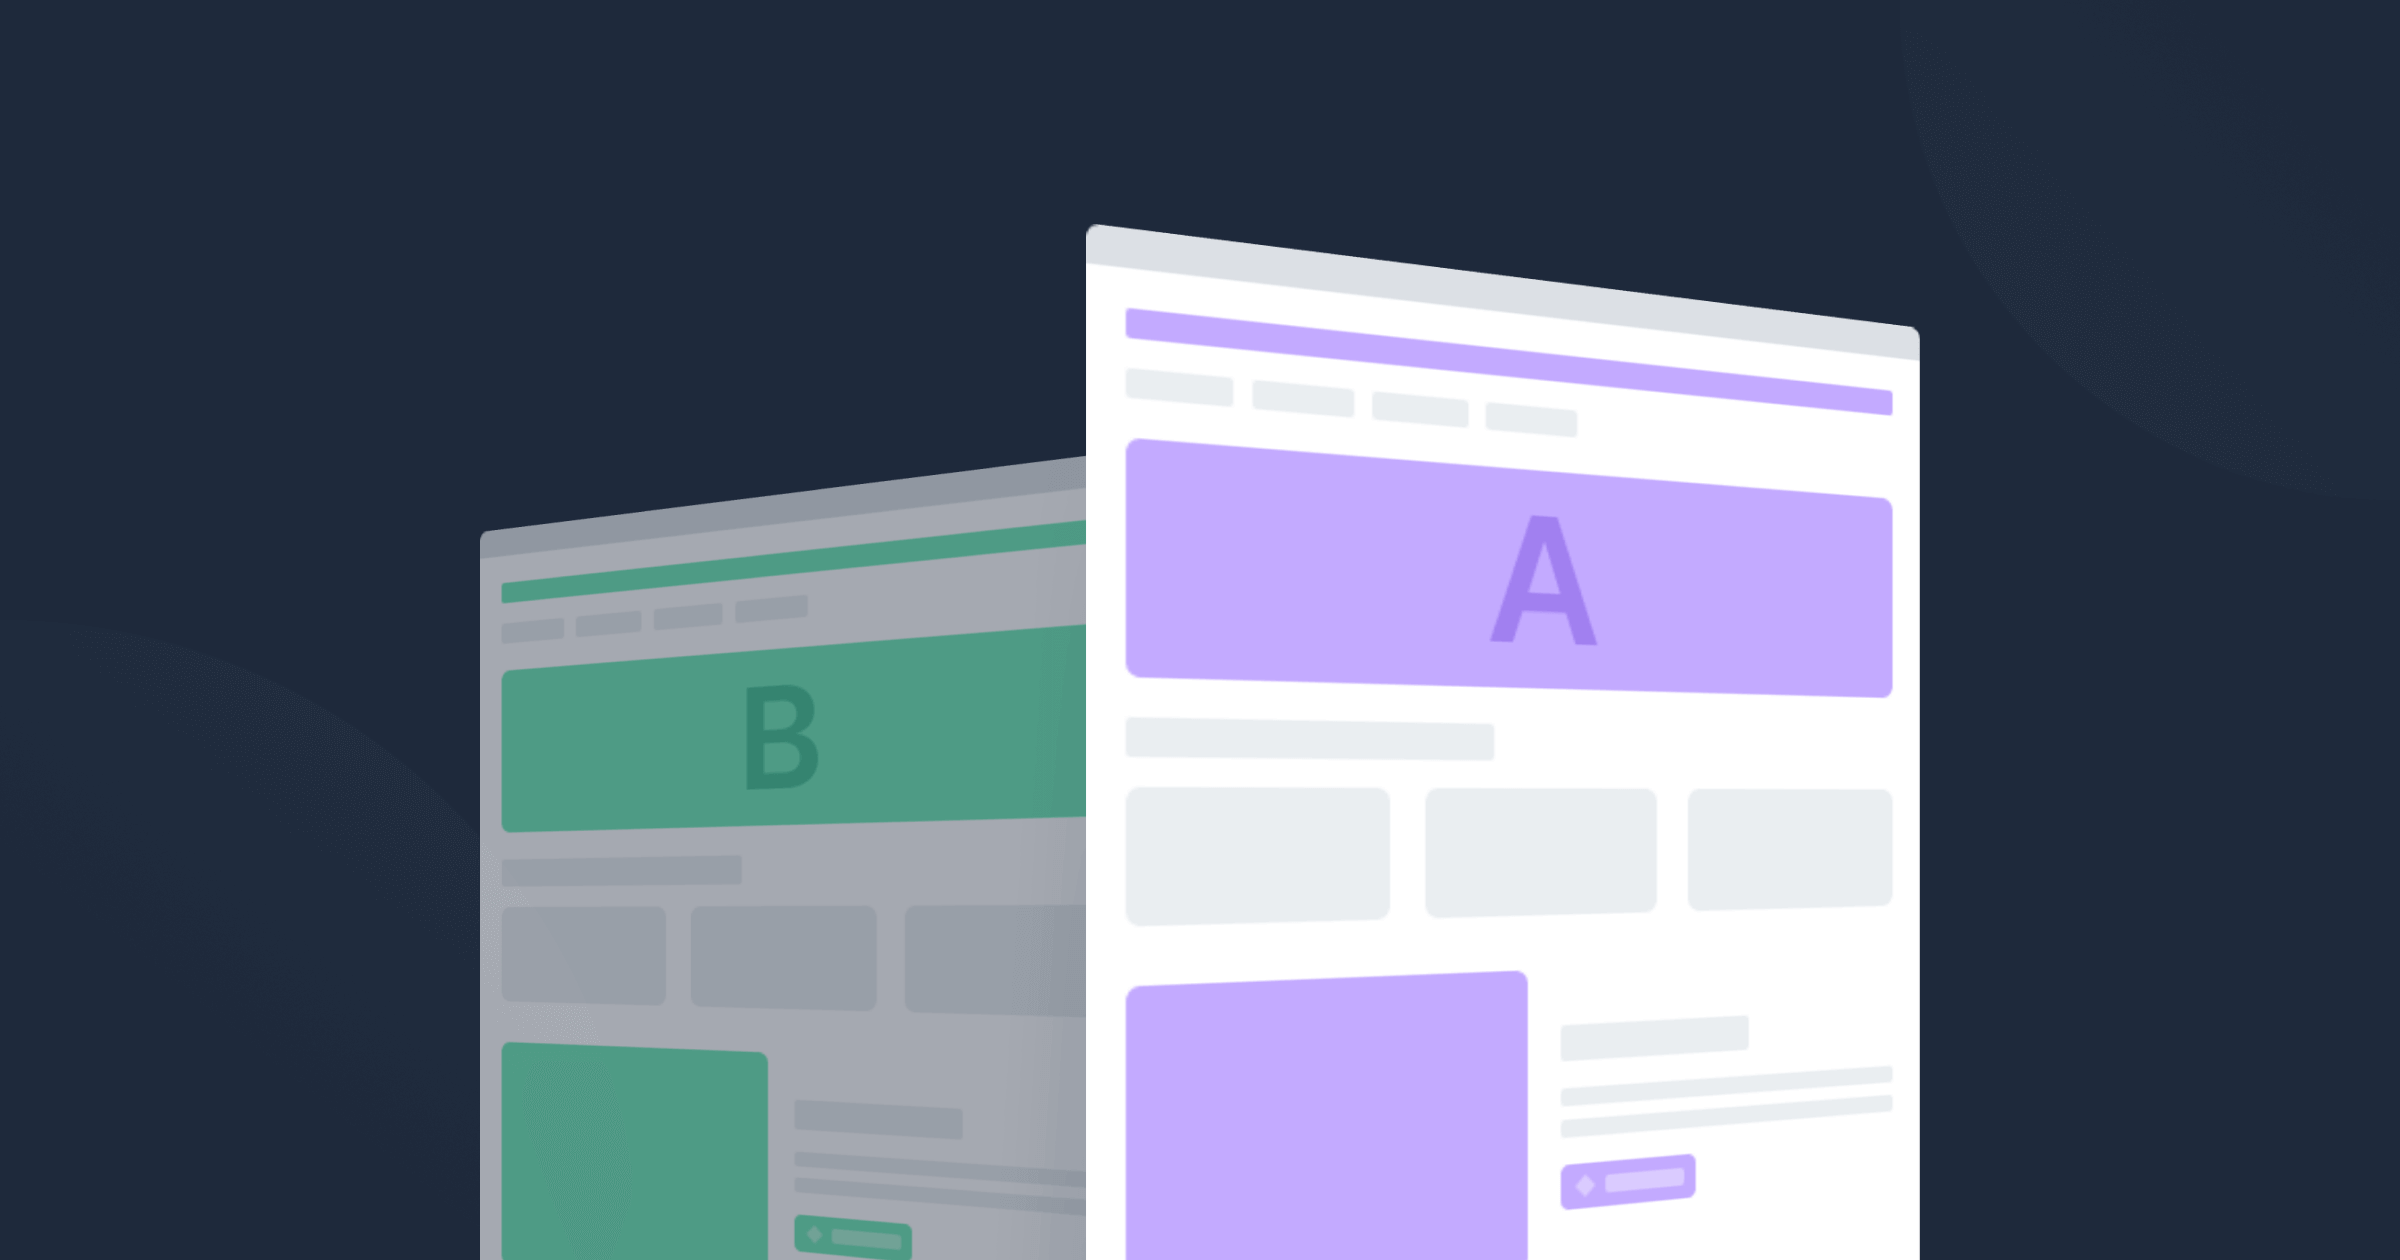 Two wireframes representing different versions of the same website, one in purple, with the letter A on top, and one in green with the letter B on top.